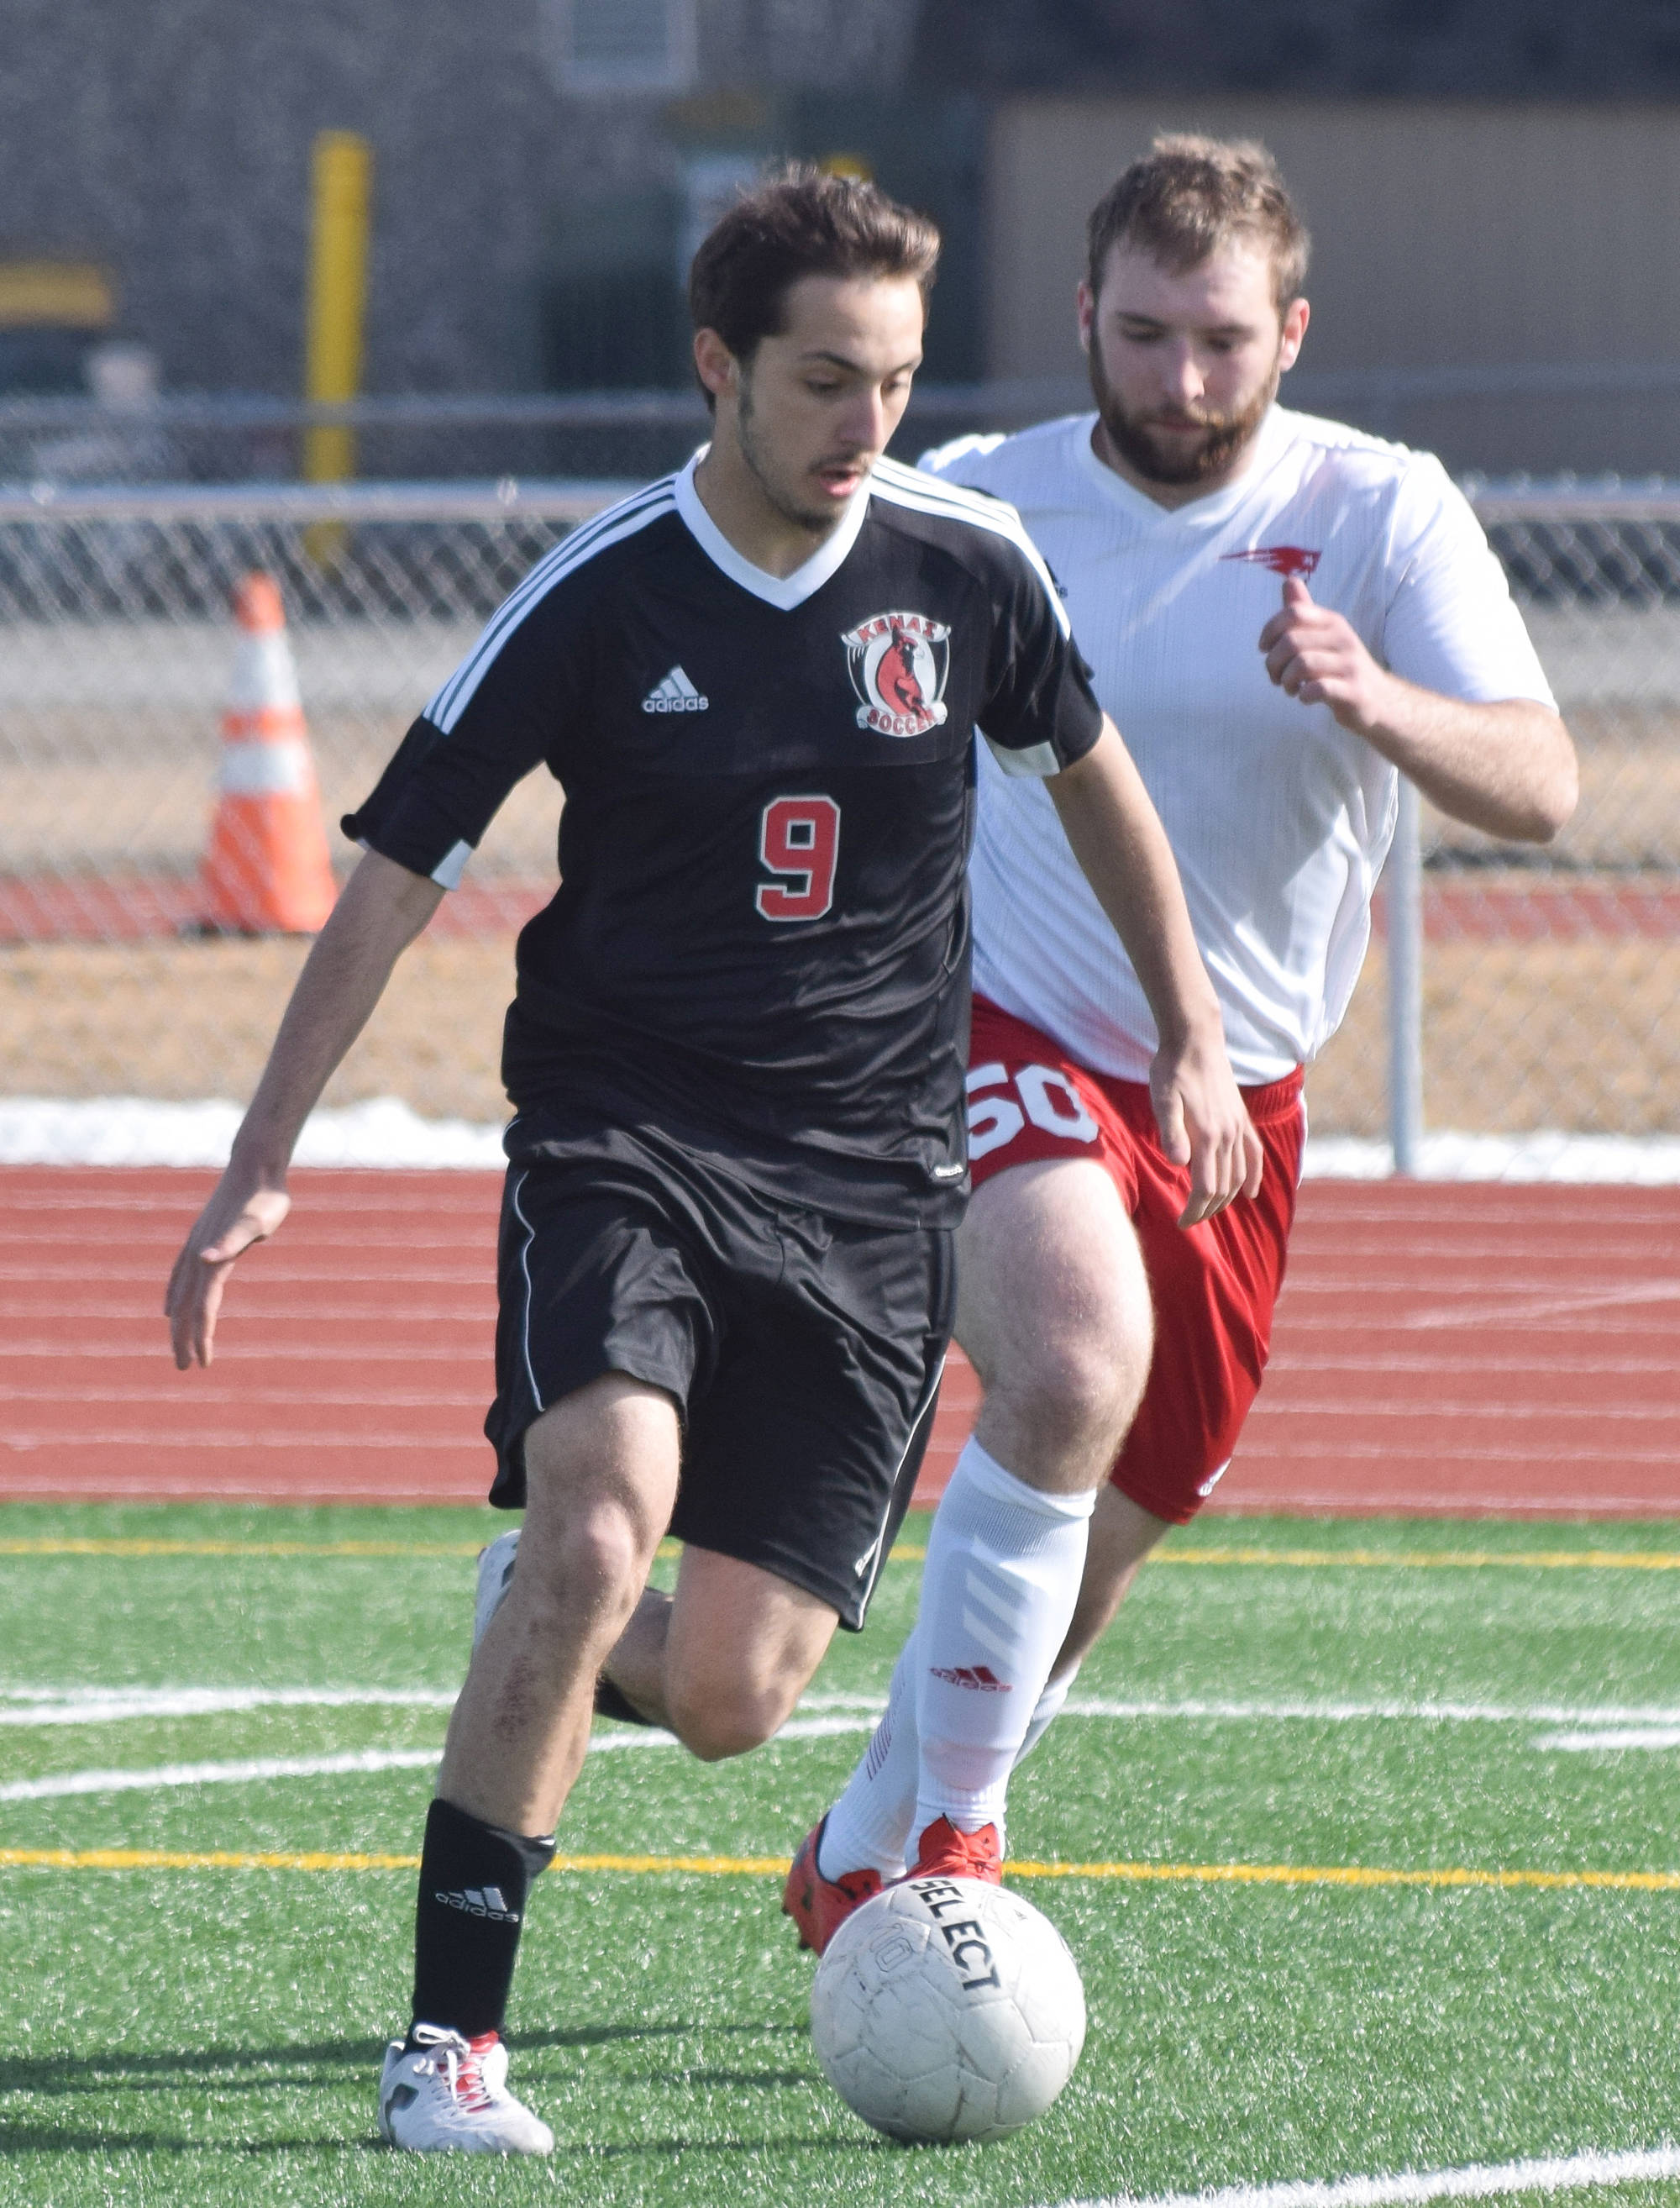 Kenai’s Tomas Levy-Canedo beats North Pole’s Jacob Blanchard to the ball Saturday, April 13, 2019, in a nonconference game at Kenai Central High School. (Photo by Joey Klecka/Peninsula Clarion)